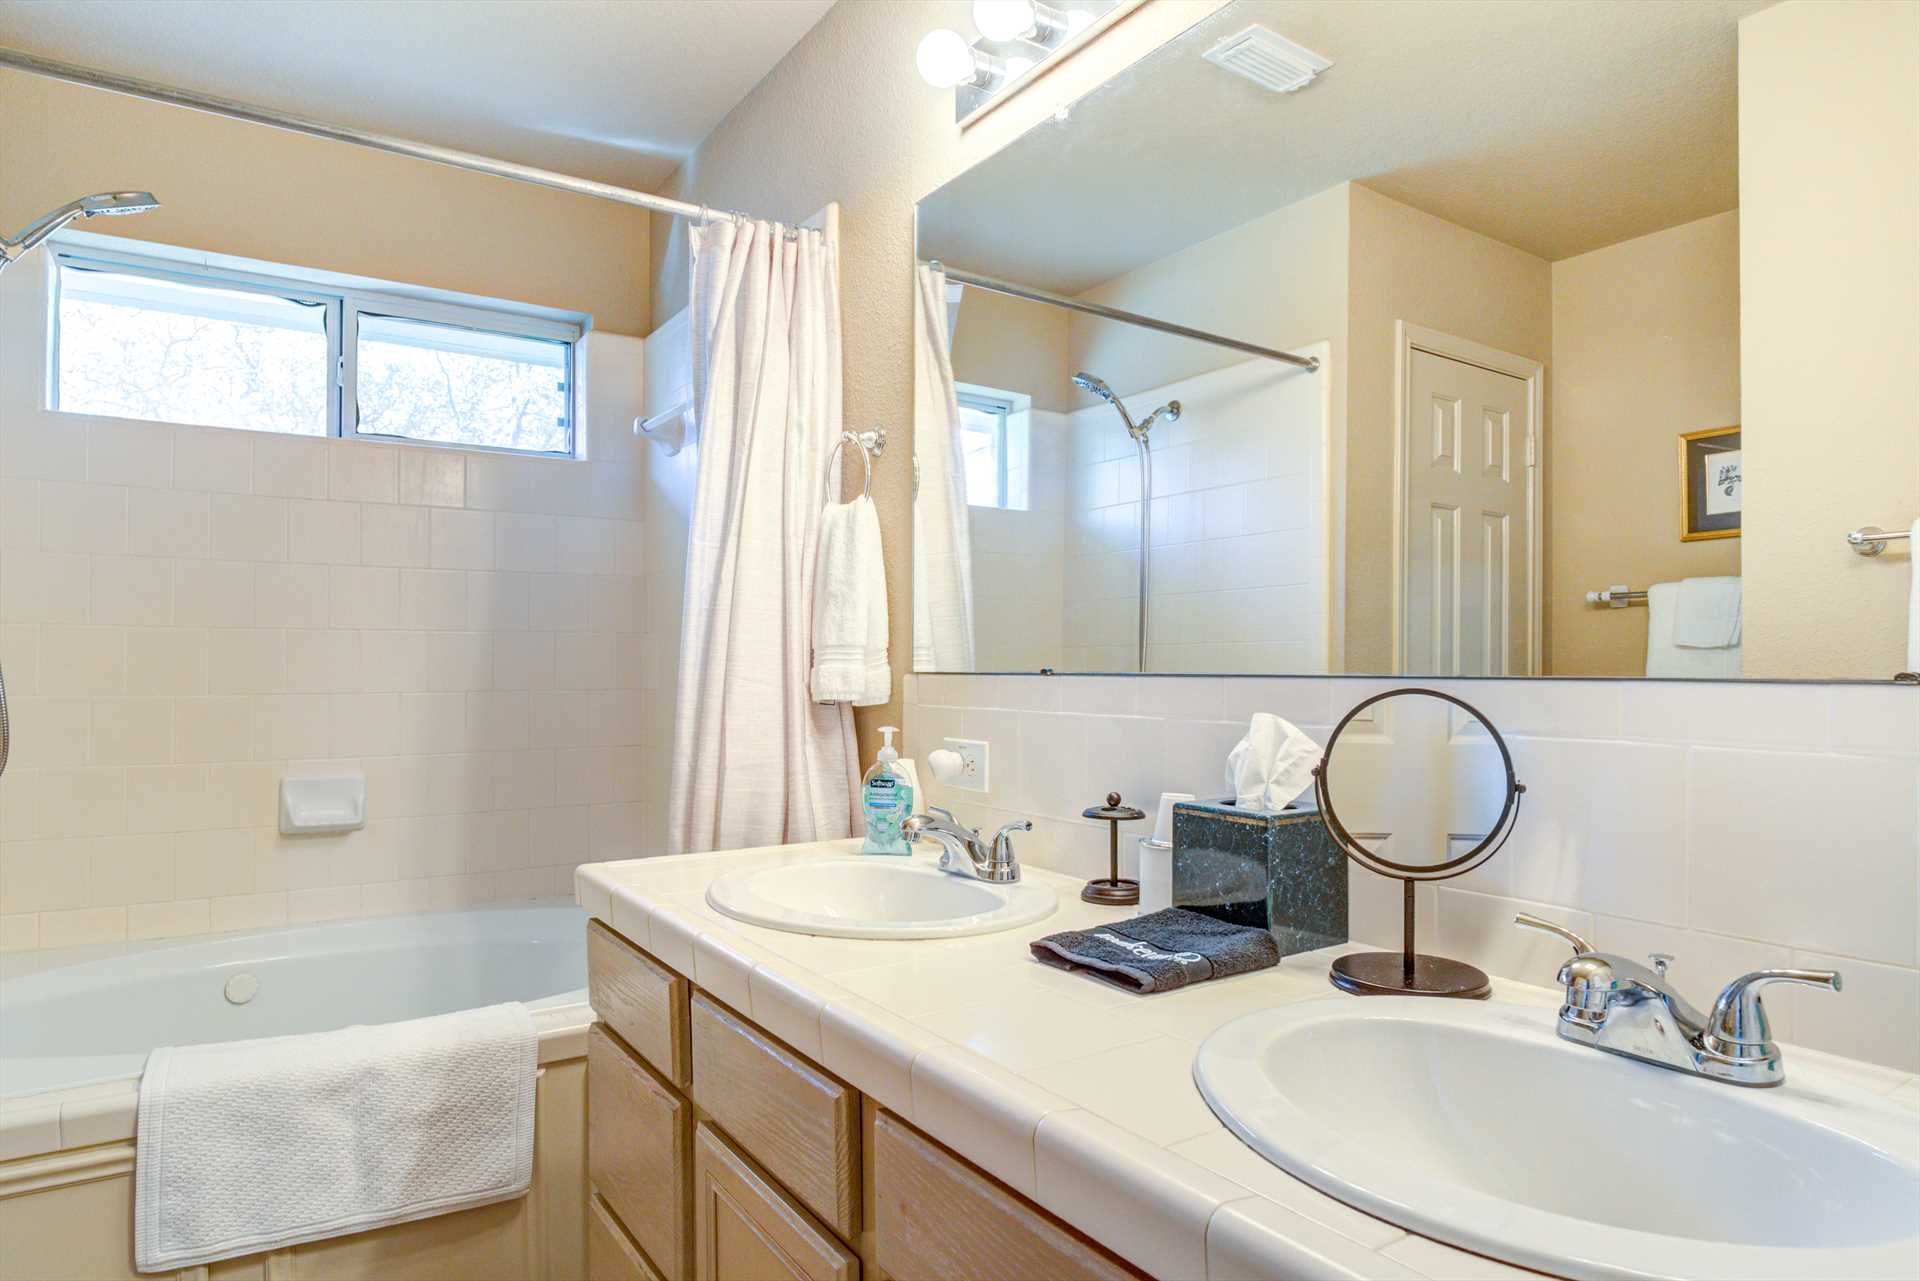                                                 Twin vanities and a big garden-style tub and shower combo await you in the master bath, complete with fresh linens!